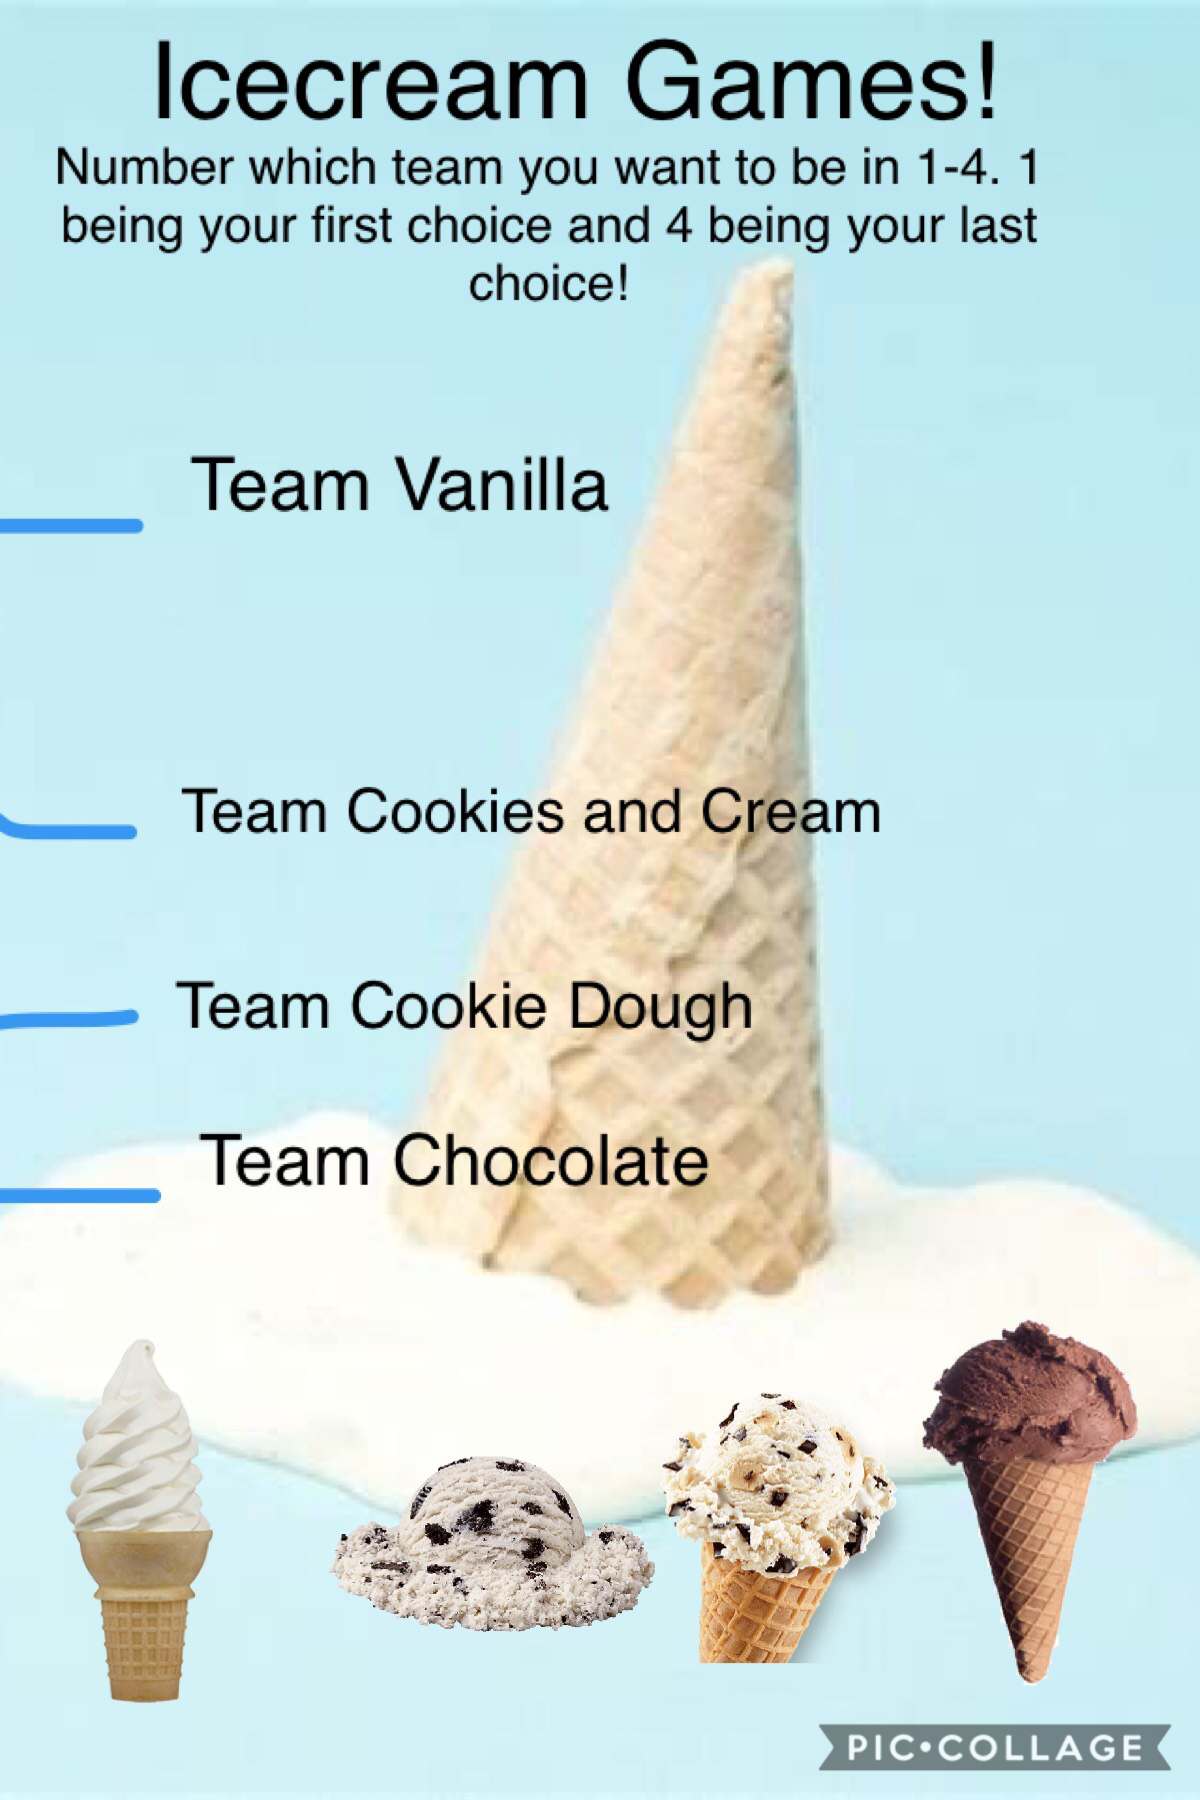 Join the icecream games! 